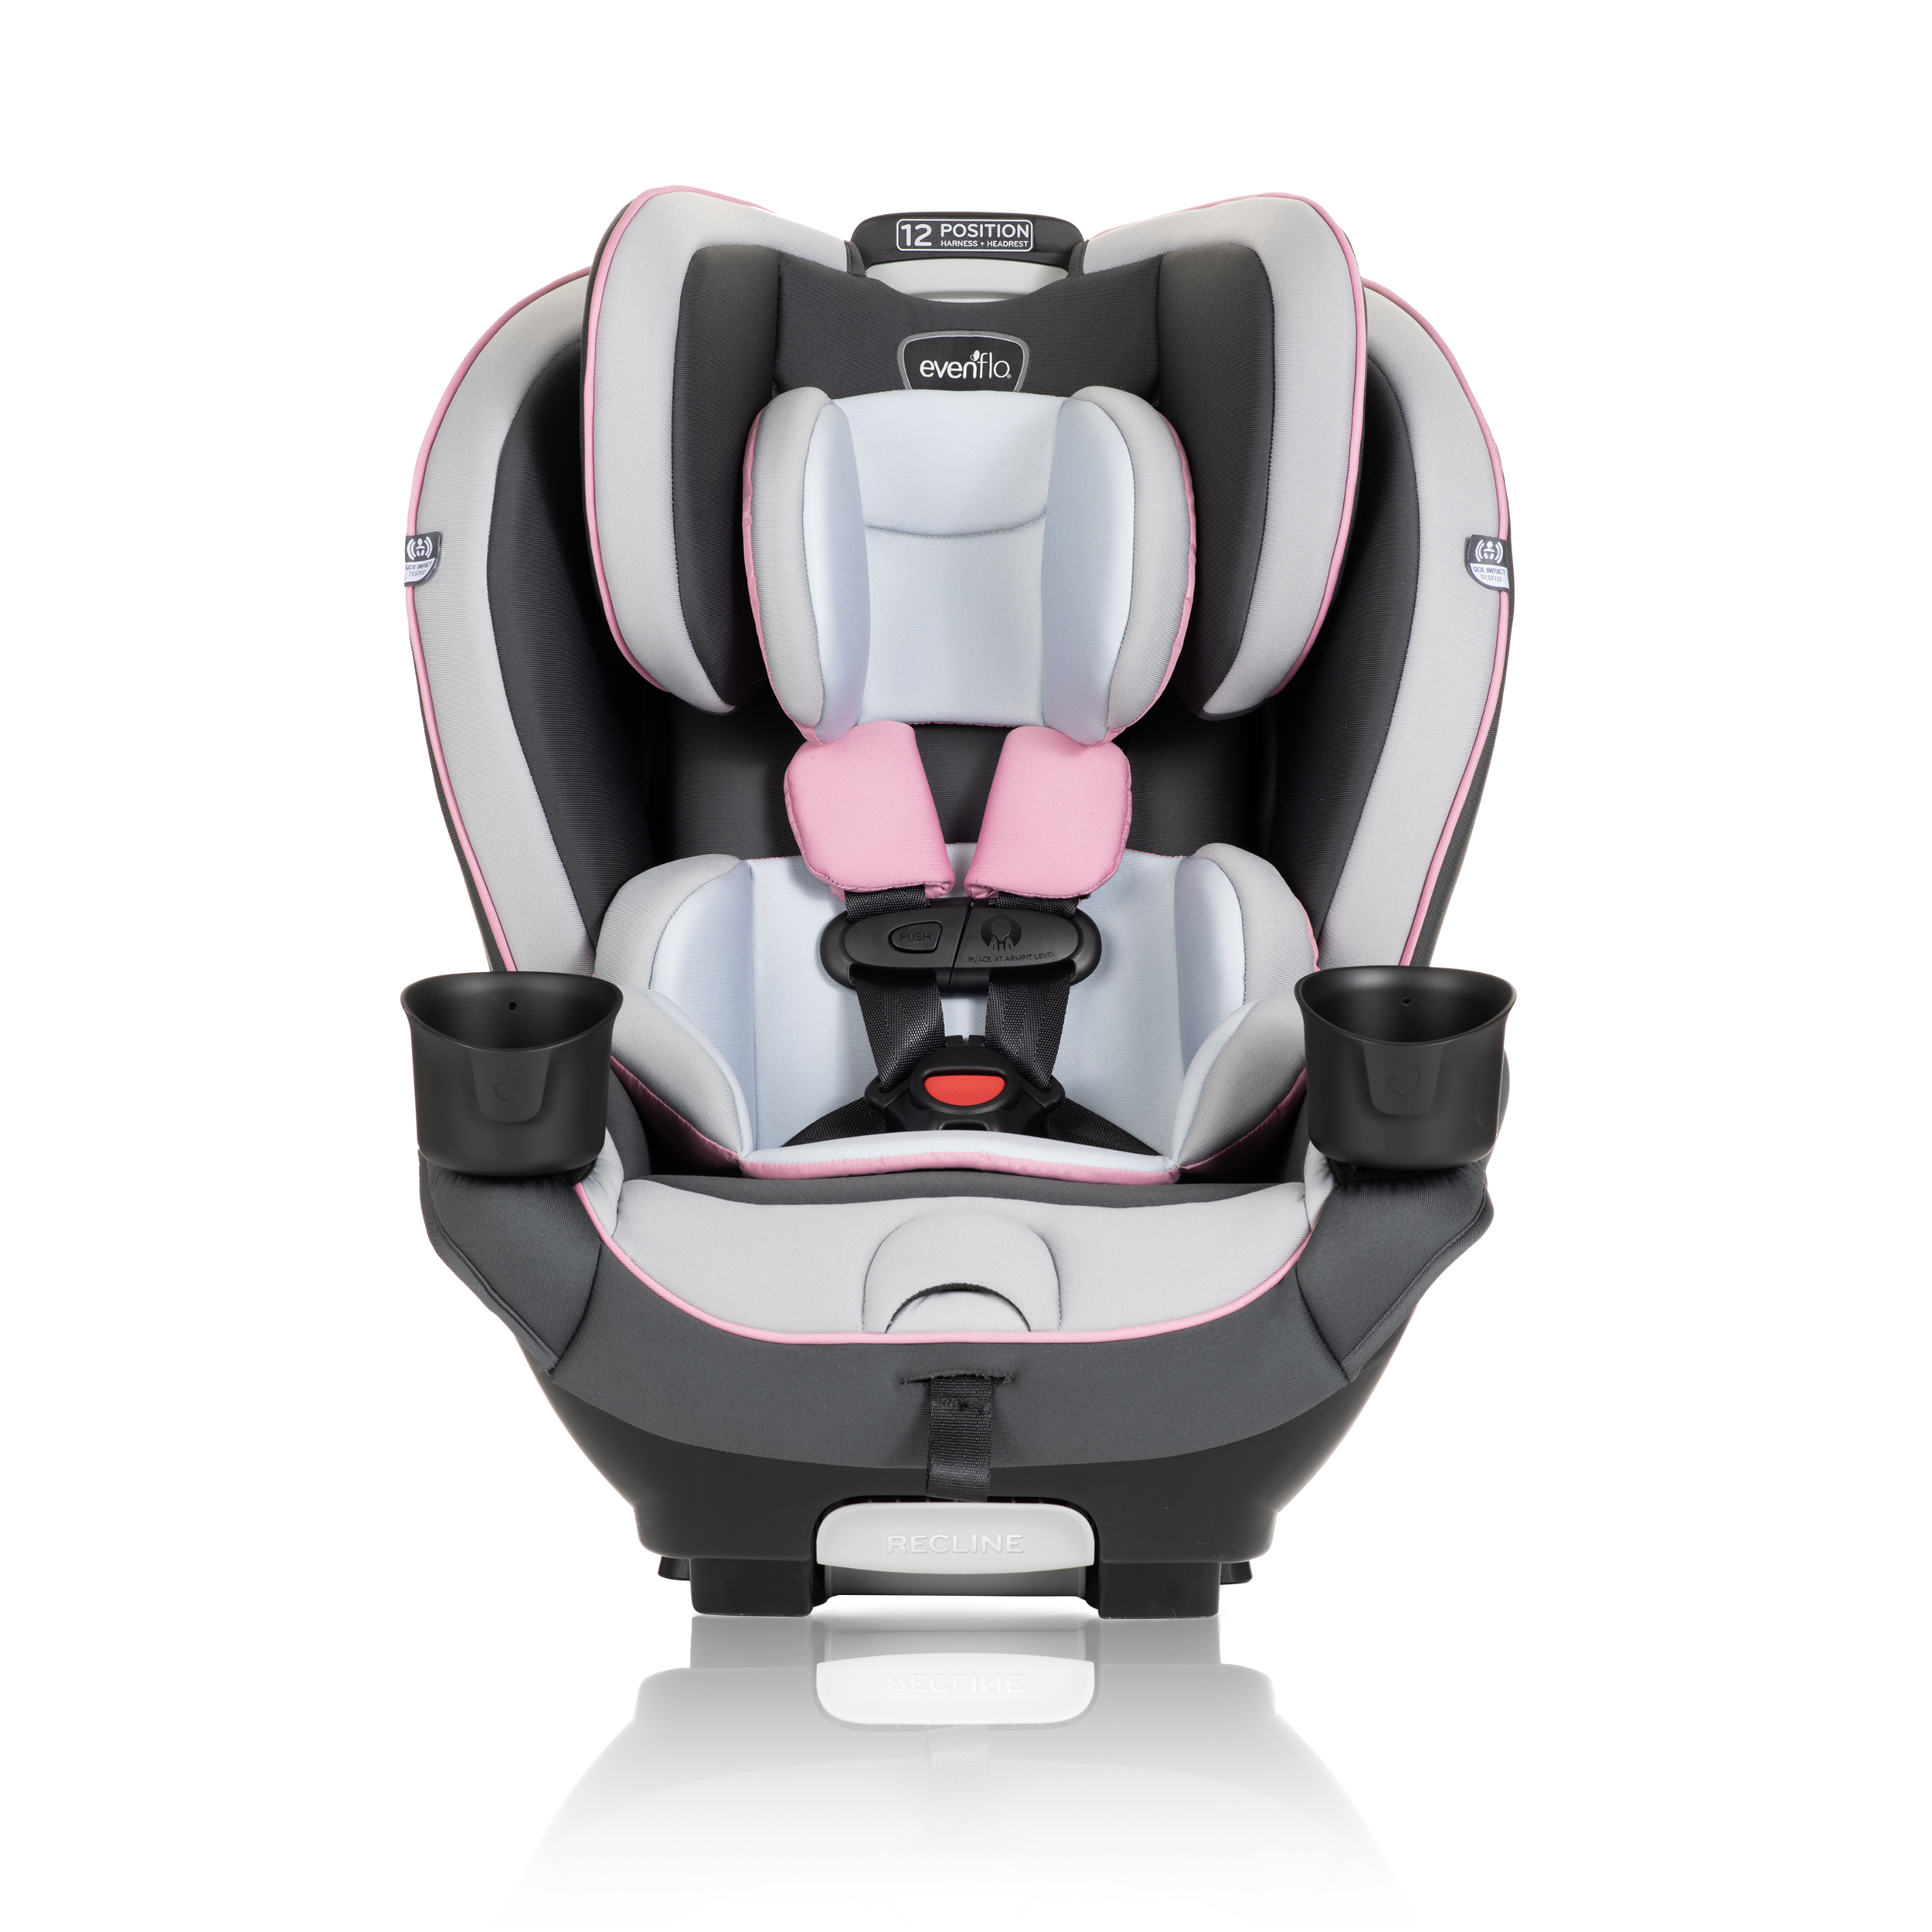 Evenflo EveryKid All-in-One High-back Booster Car Seat, Soft Pink - image 1 of 13